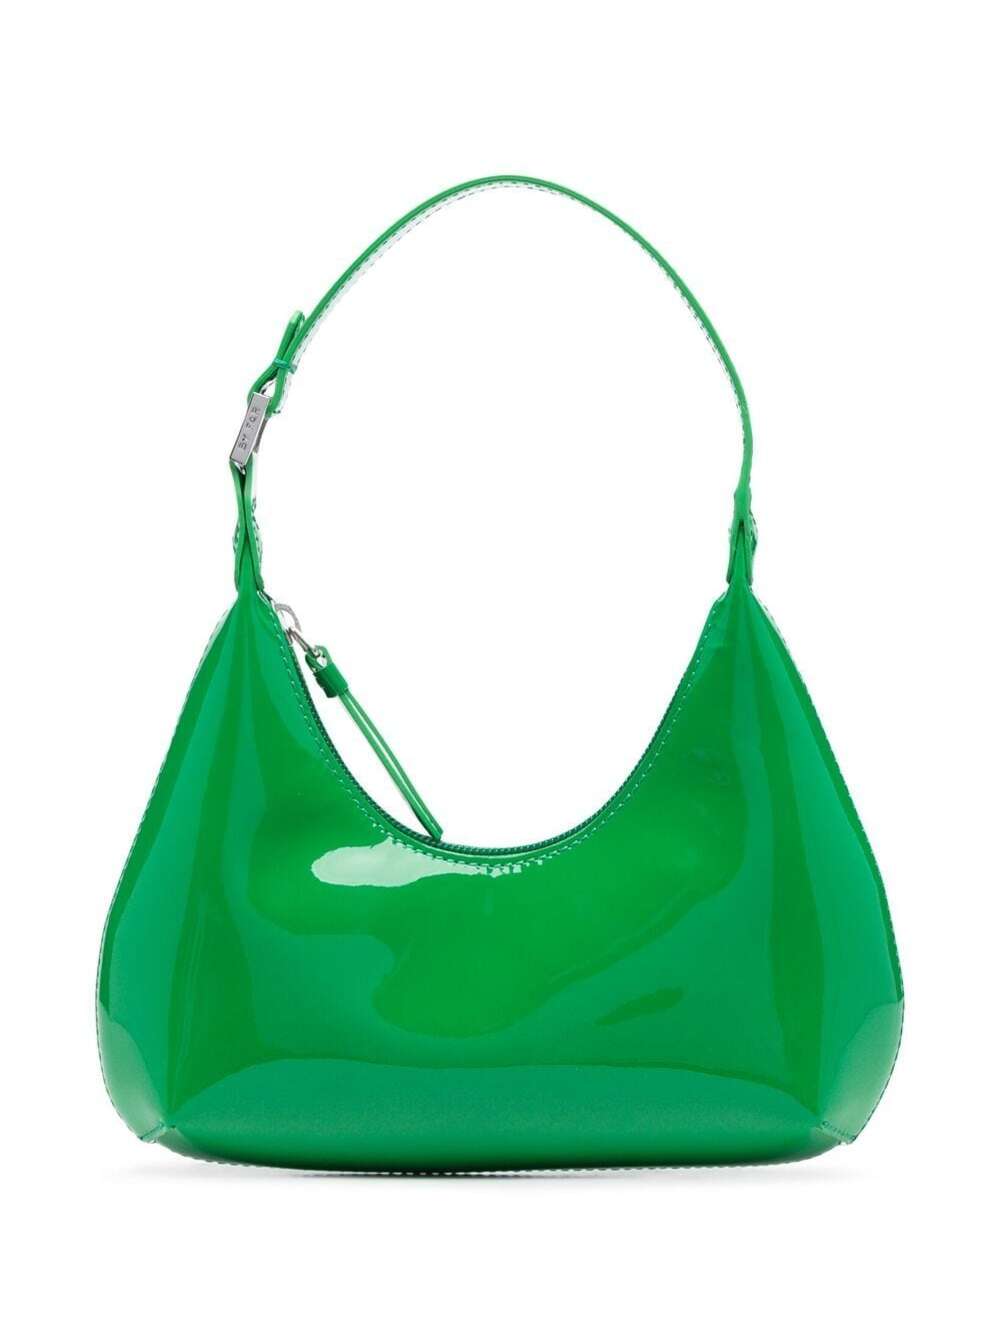 baby Amber Green Handbag With Adjustable Handle And Zip Closure In Patent Leather Woman By Far